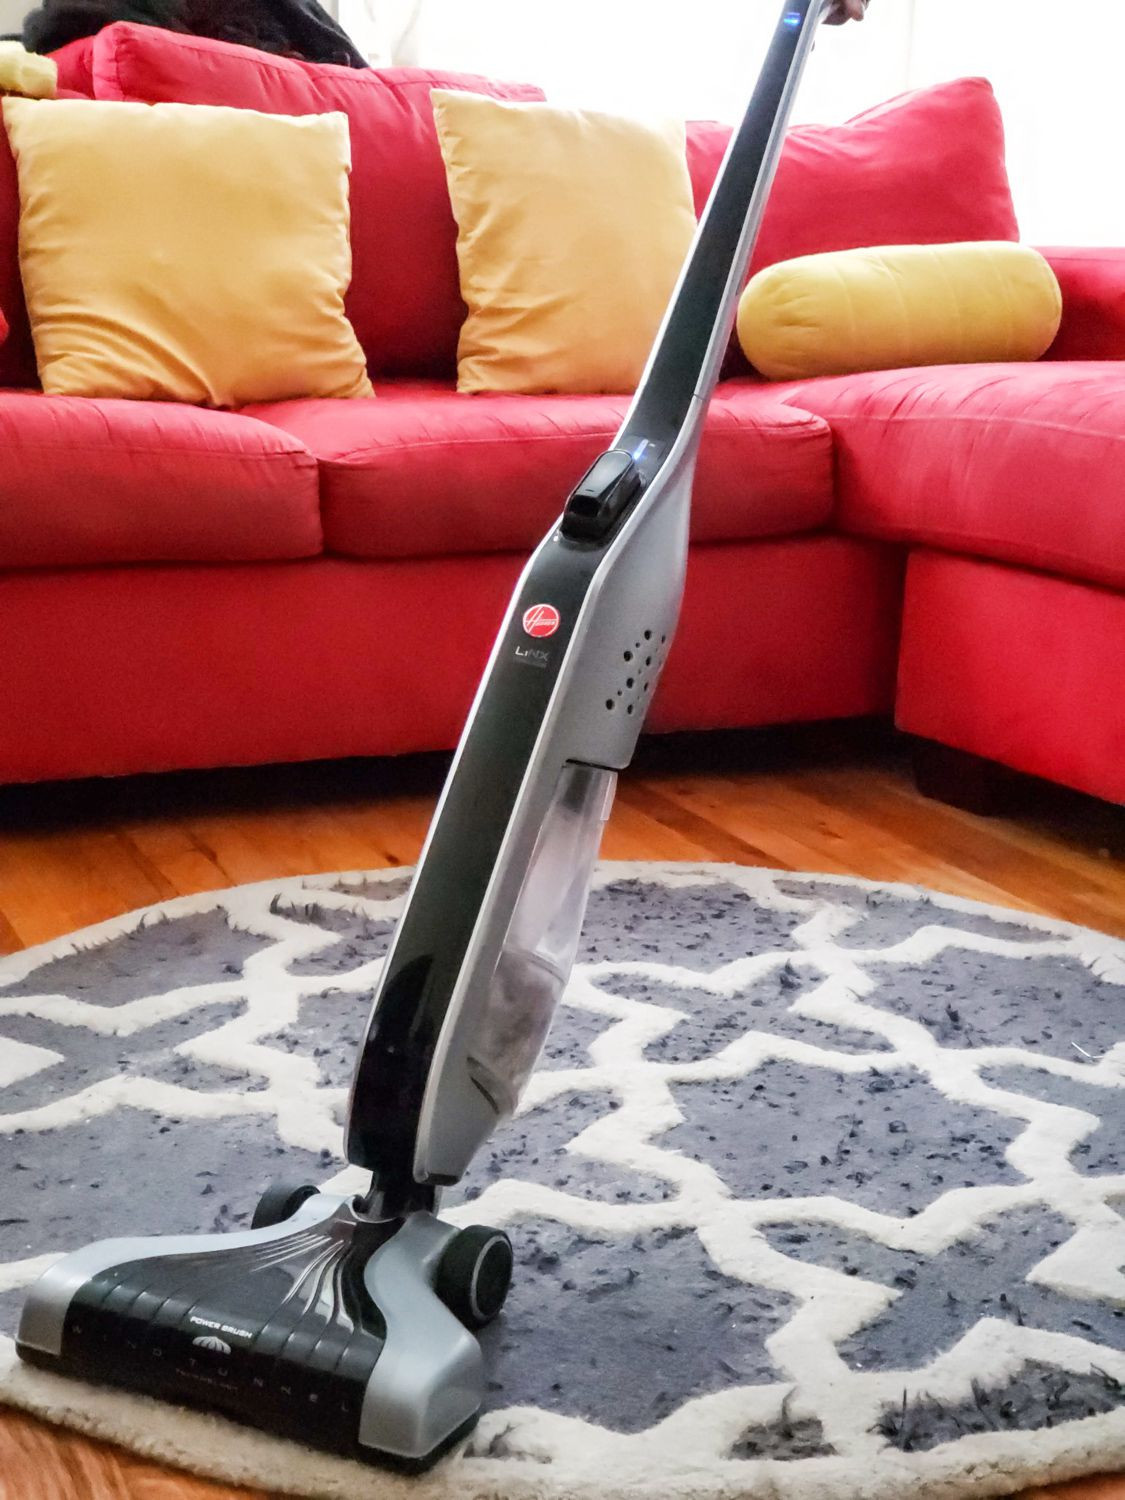 shark hardwood floor cleaner of the 10 best vacuum cleaners to buy in 2018 intended for 4135822 2 5bbf7230c9e77c005168f21c